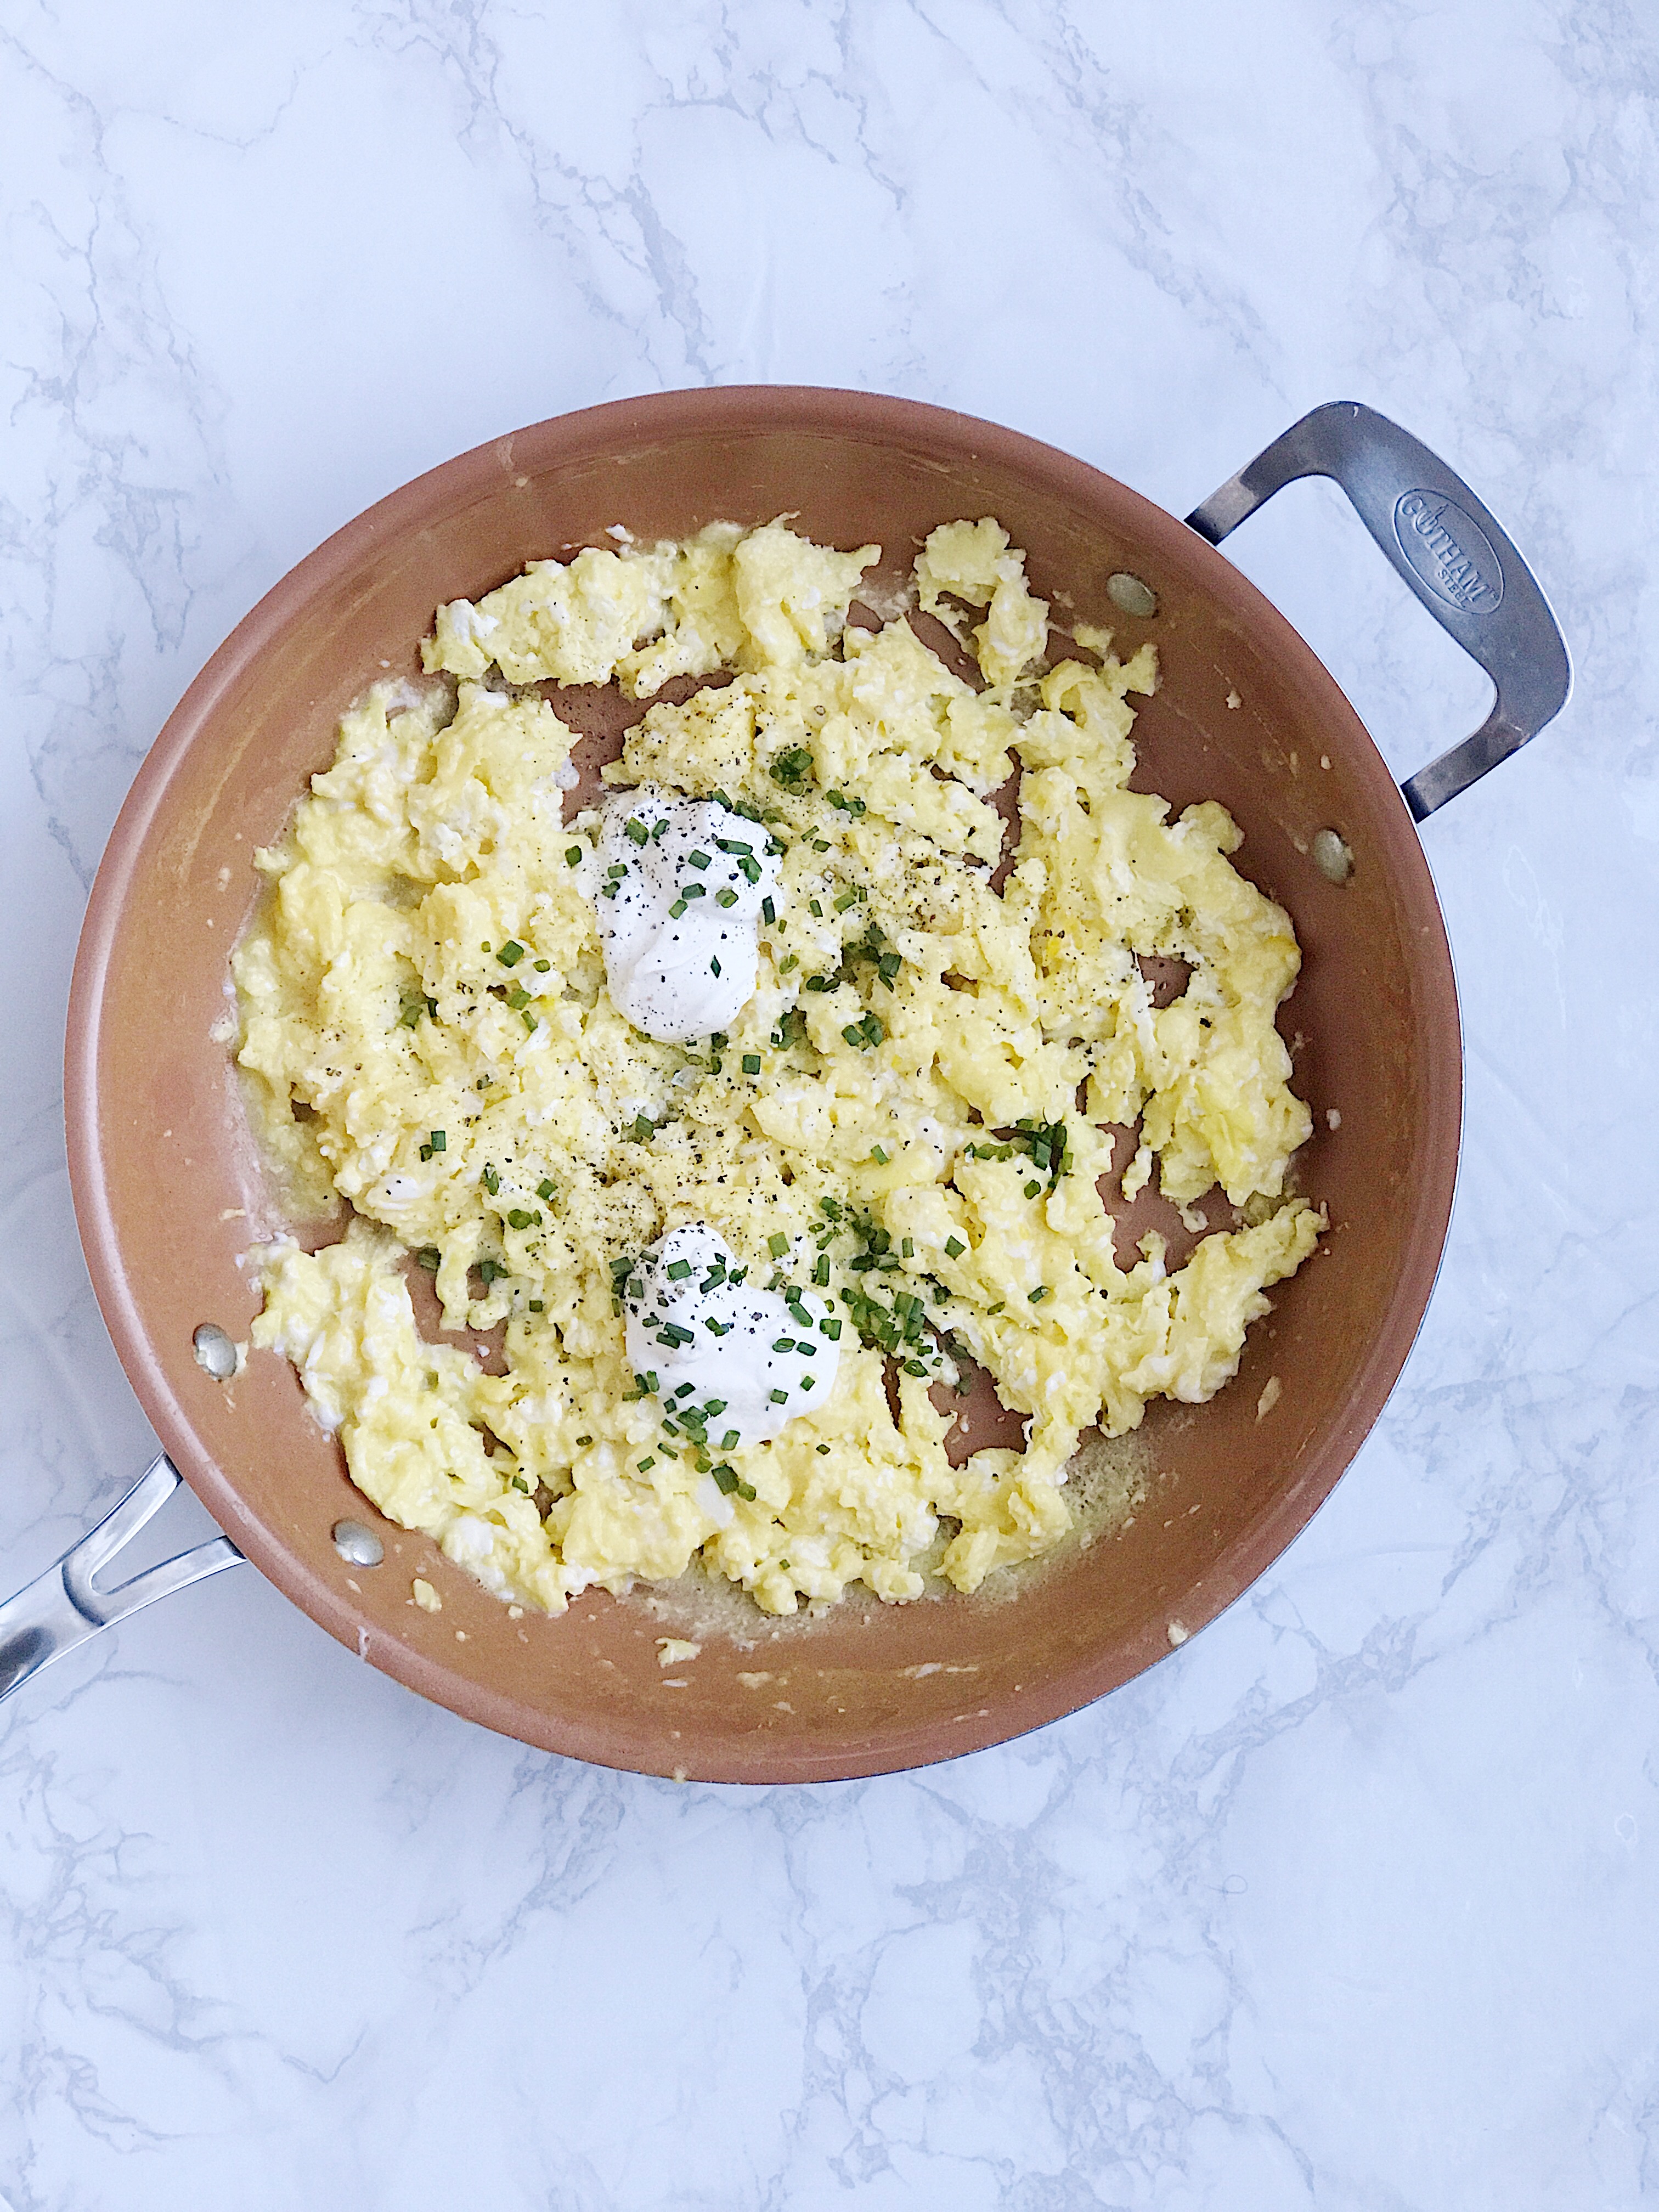 A bowl full of eggs made from this scrambled eggs recipe using creme fraiche